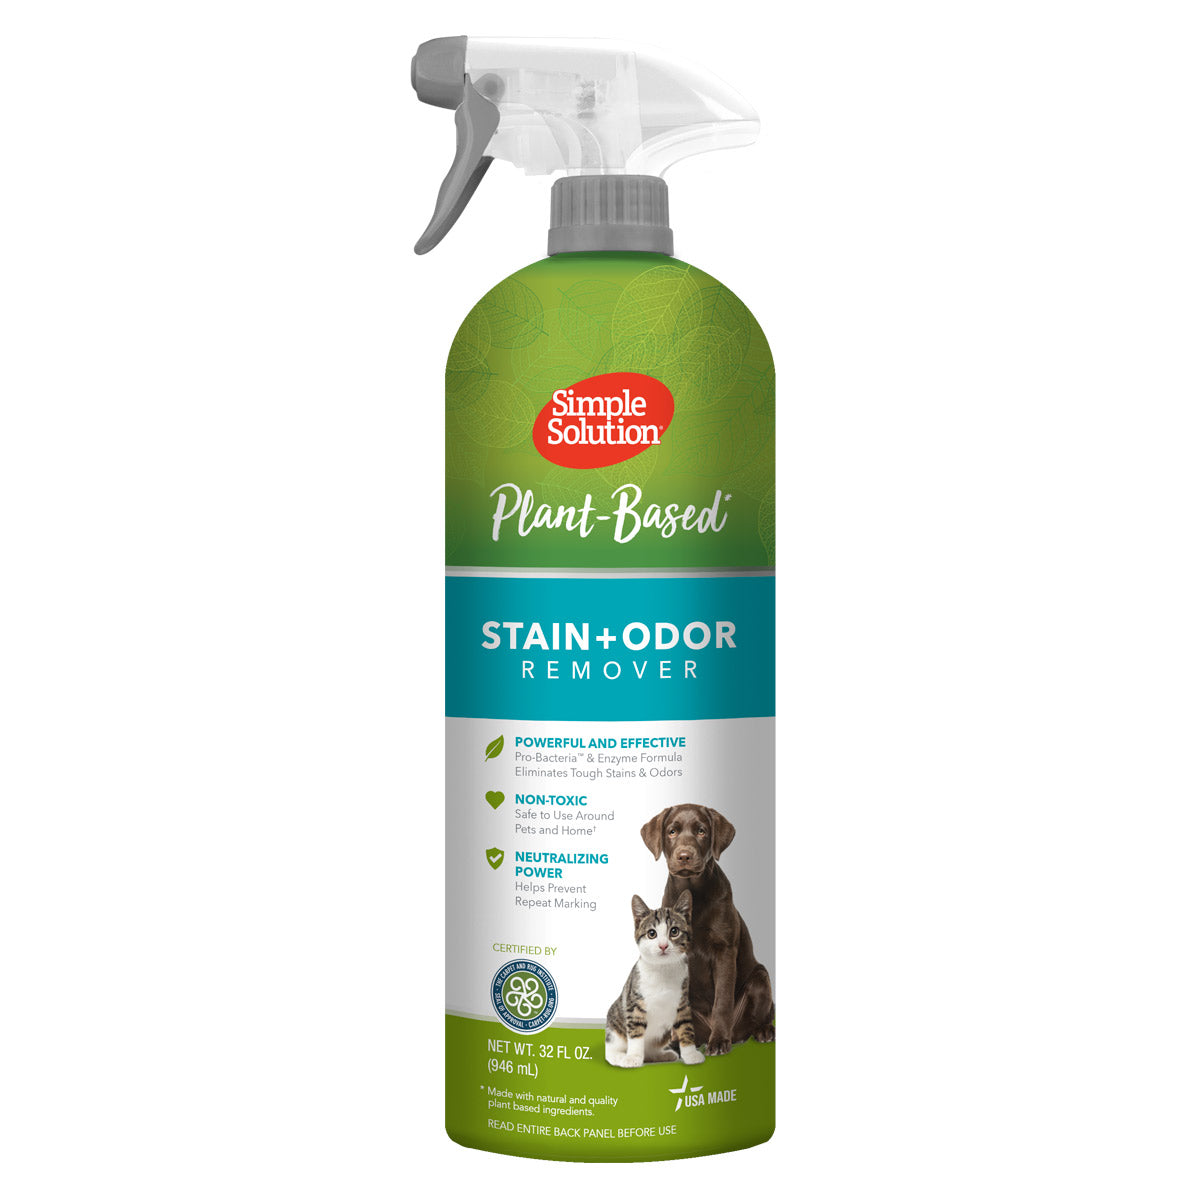 Simple Solution Plant-Based Stain and Odor Remover 32oz